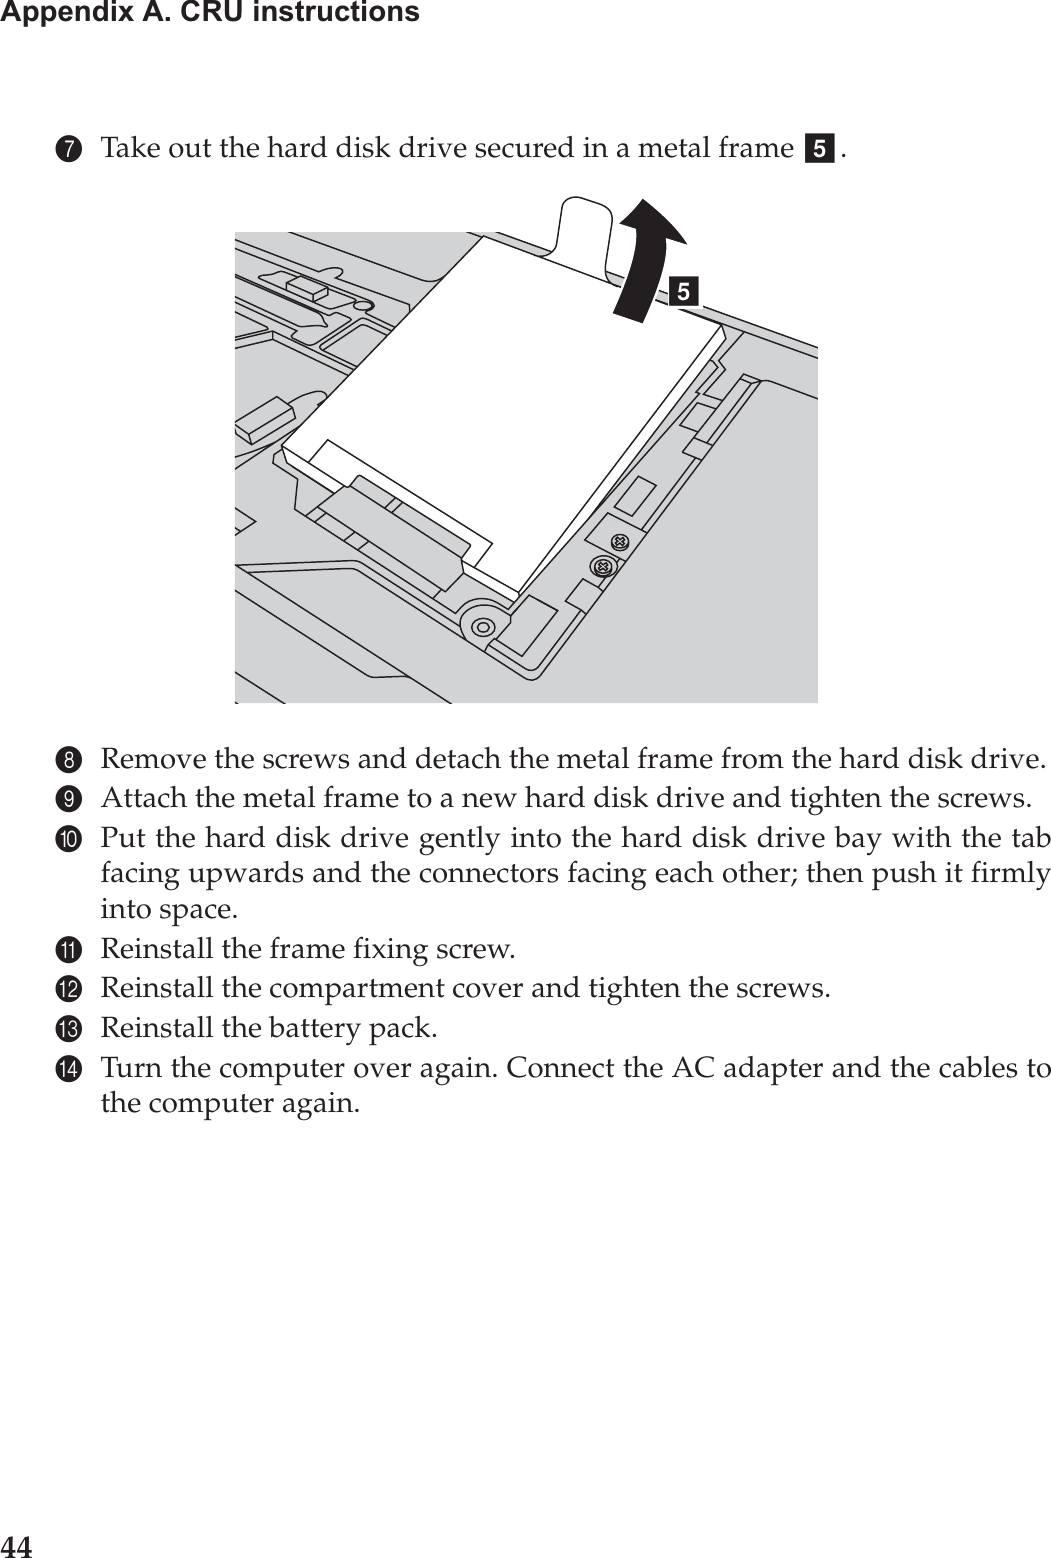 44Appendix A. CRU instructions7Take out the hard disk drive secured in a metal frame  .8Remove the screws and detach the metal frame from the hard disk drive.9Attach the metal frame to a new hard disk drive and tighten the screws.0Put the hard disk drive gently into the hard disk drive bay with the tabfacing upwards and the connectors facing each other; then push it firmlyinto space.AReinstall the frame fixing screw.BReinstall the compartment cover and tighten the screws.CReinstall the battery pack.DTurn the computer over again. Connect the AC adapter and the cables tothe computer again.ee